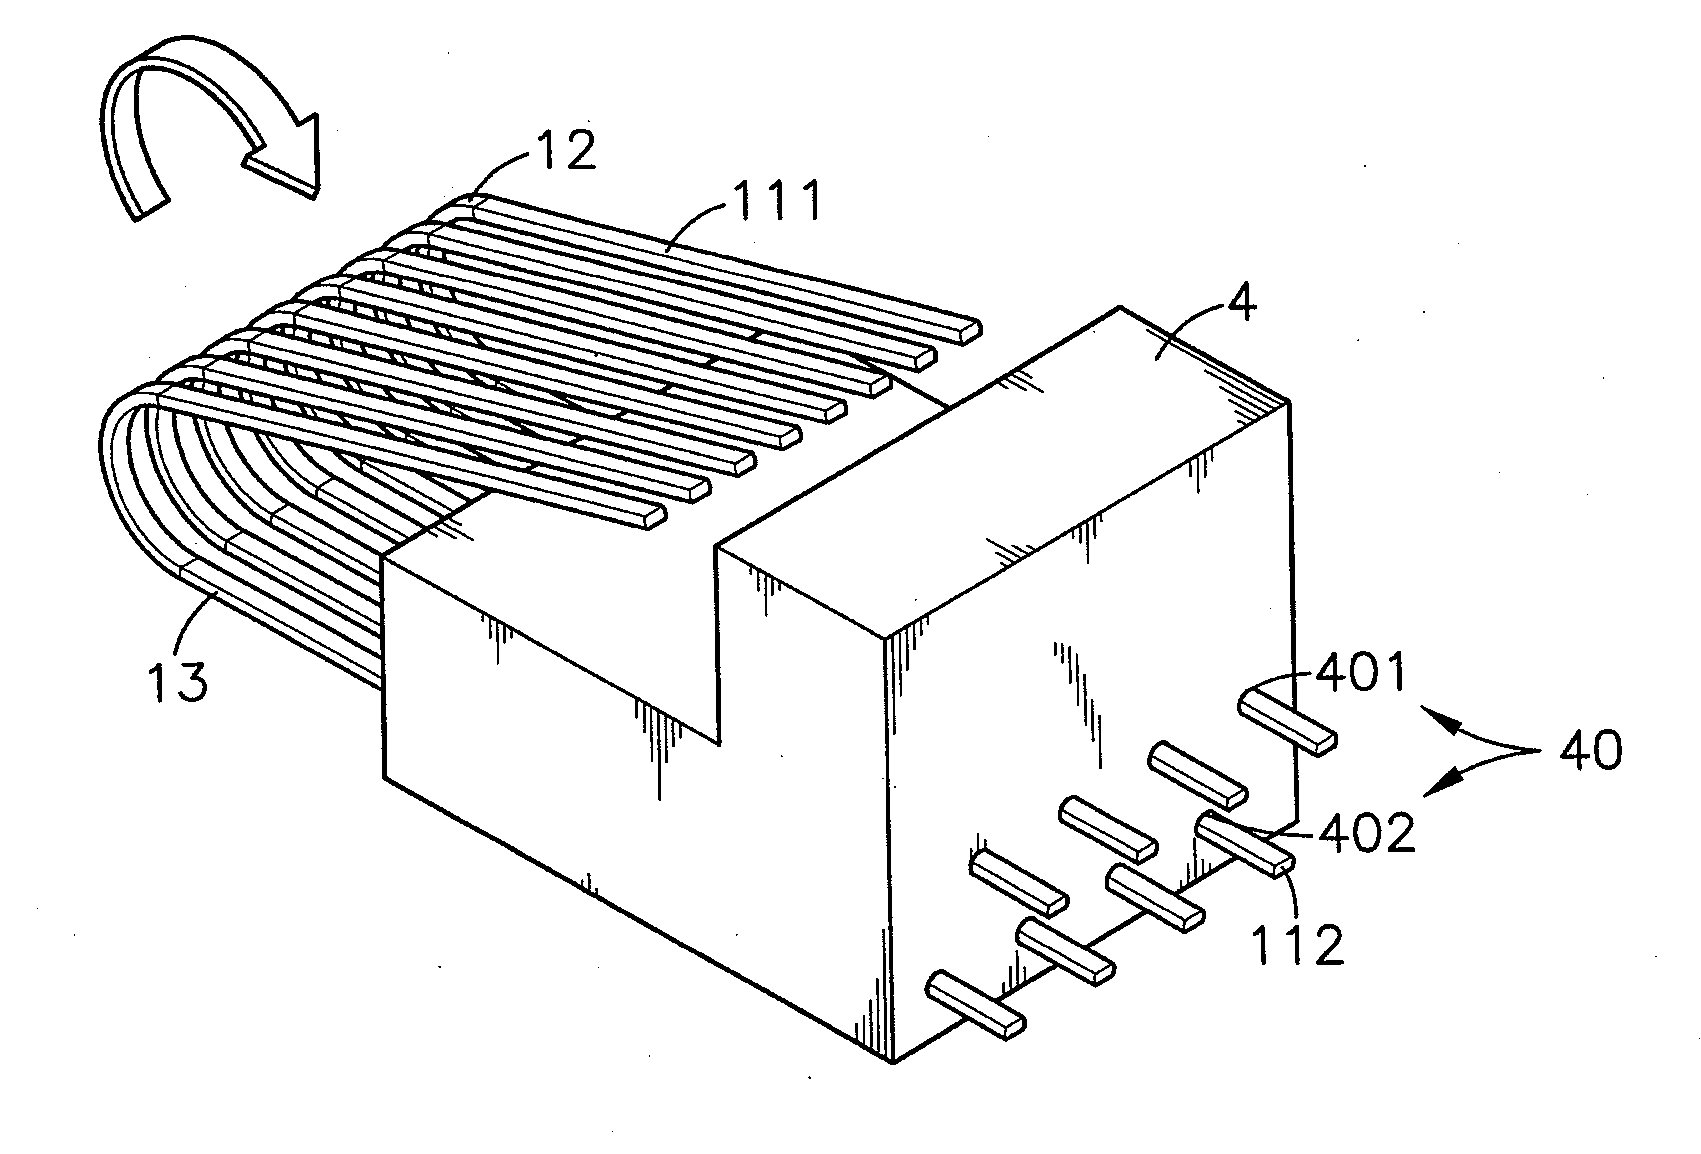 Method for fabricating a conducting terminal set for electrical connector